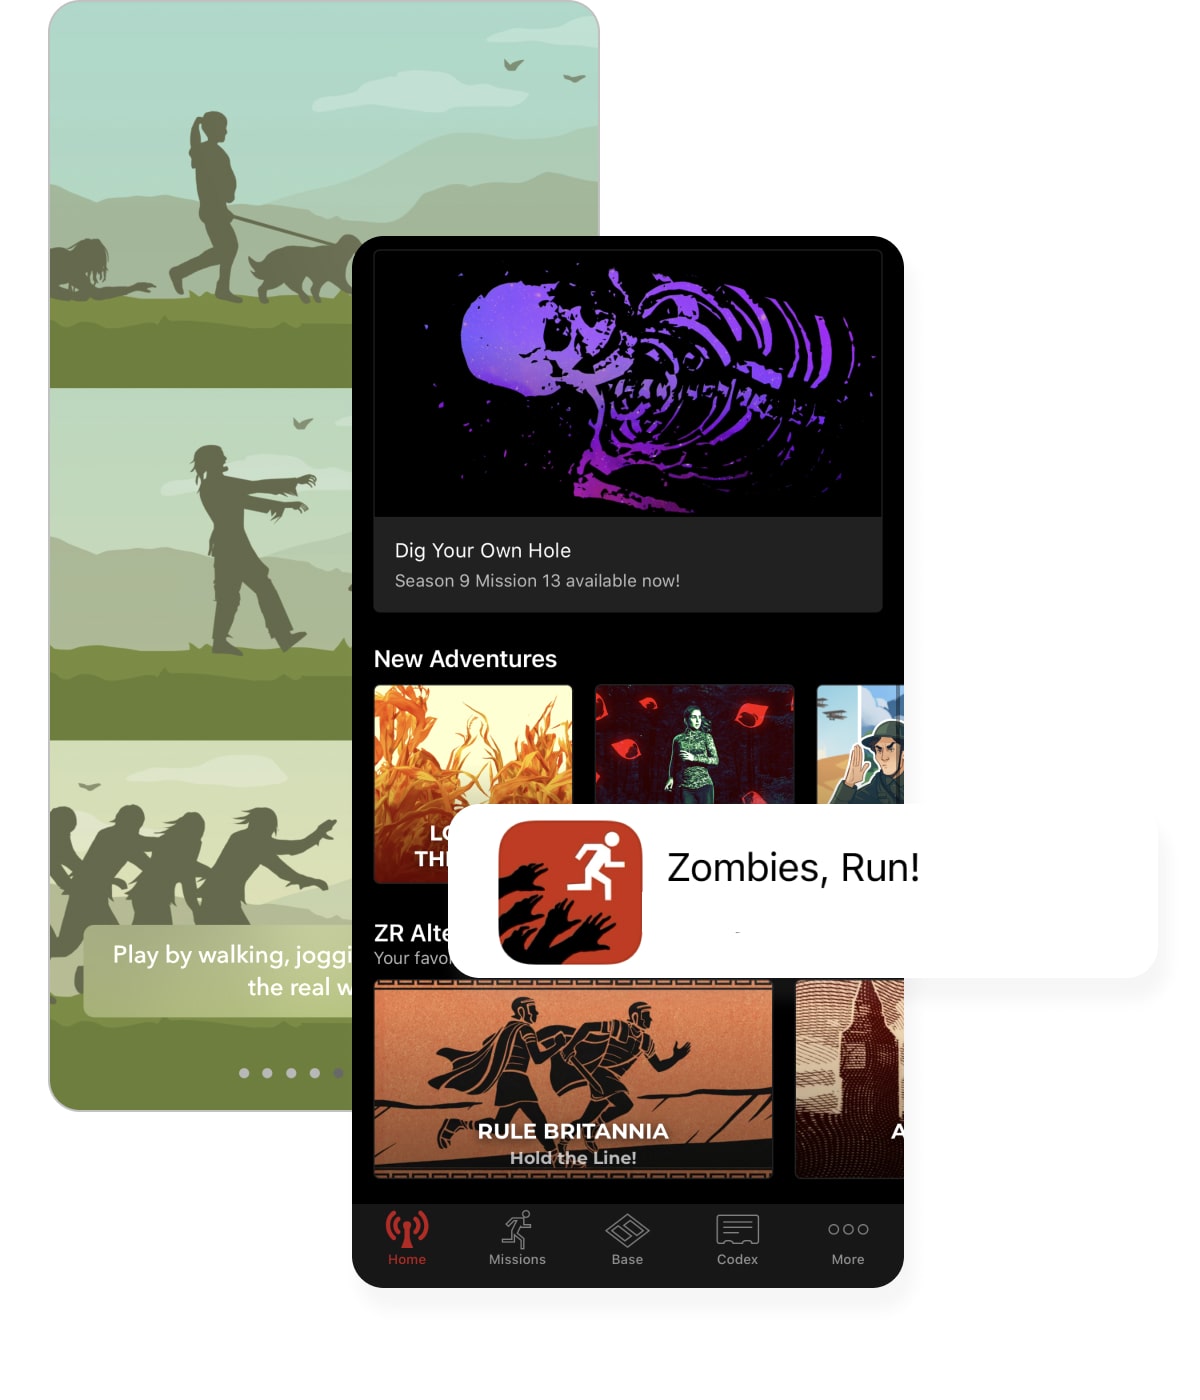 Zombie run fitness app with gamification